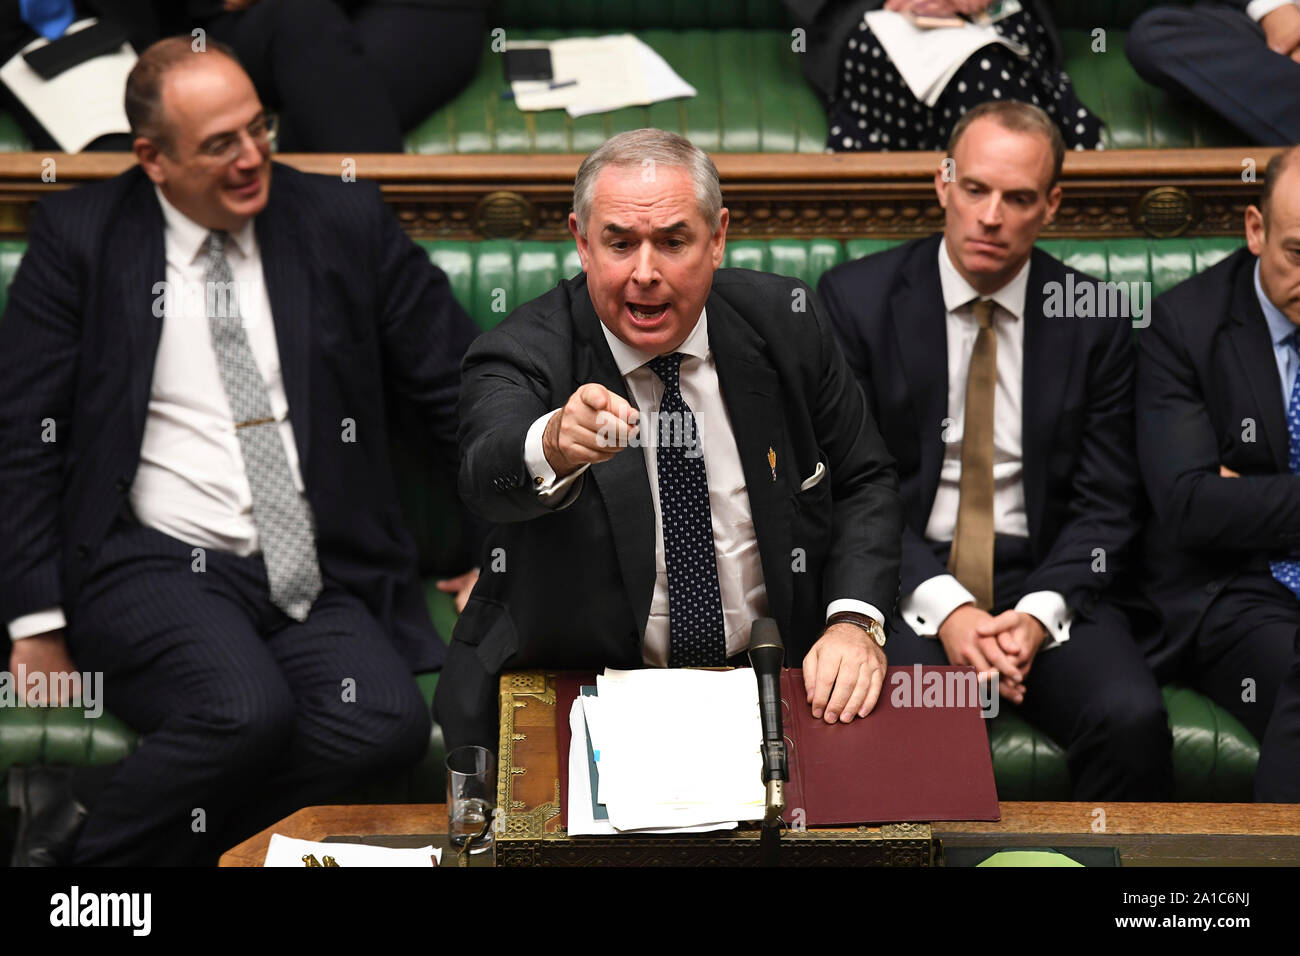 London, UK. 25th Sep 2019. Britain's Attorney General Geoffrey Cox (Front) speaks at the House of Commons in London, Britain, on Sept. 25, 2019. British Prime Minister Boris Johnson faced enormous pressure as the parliament re-opened Wednesday after the Supreme Court ruled his act to suspend the parliament for five weeks was unlawful. (Jessica Taylor/UK Parliament/Handout via Xinhua) HOC MANDATORY CREDIT: UK Parliament/Jessica Taylor Credit: Xinhua/Alamy Live News Stock Photo